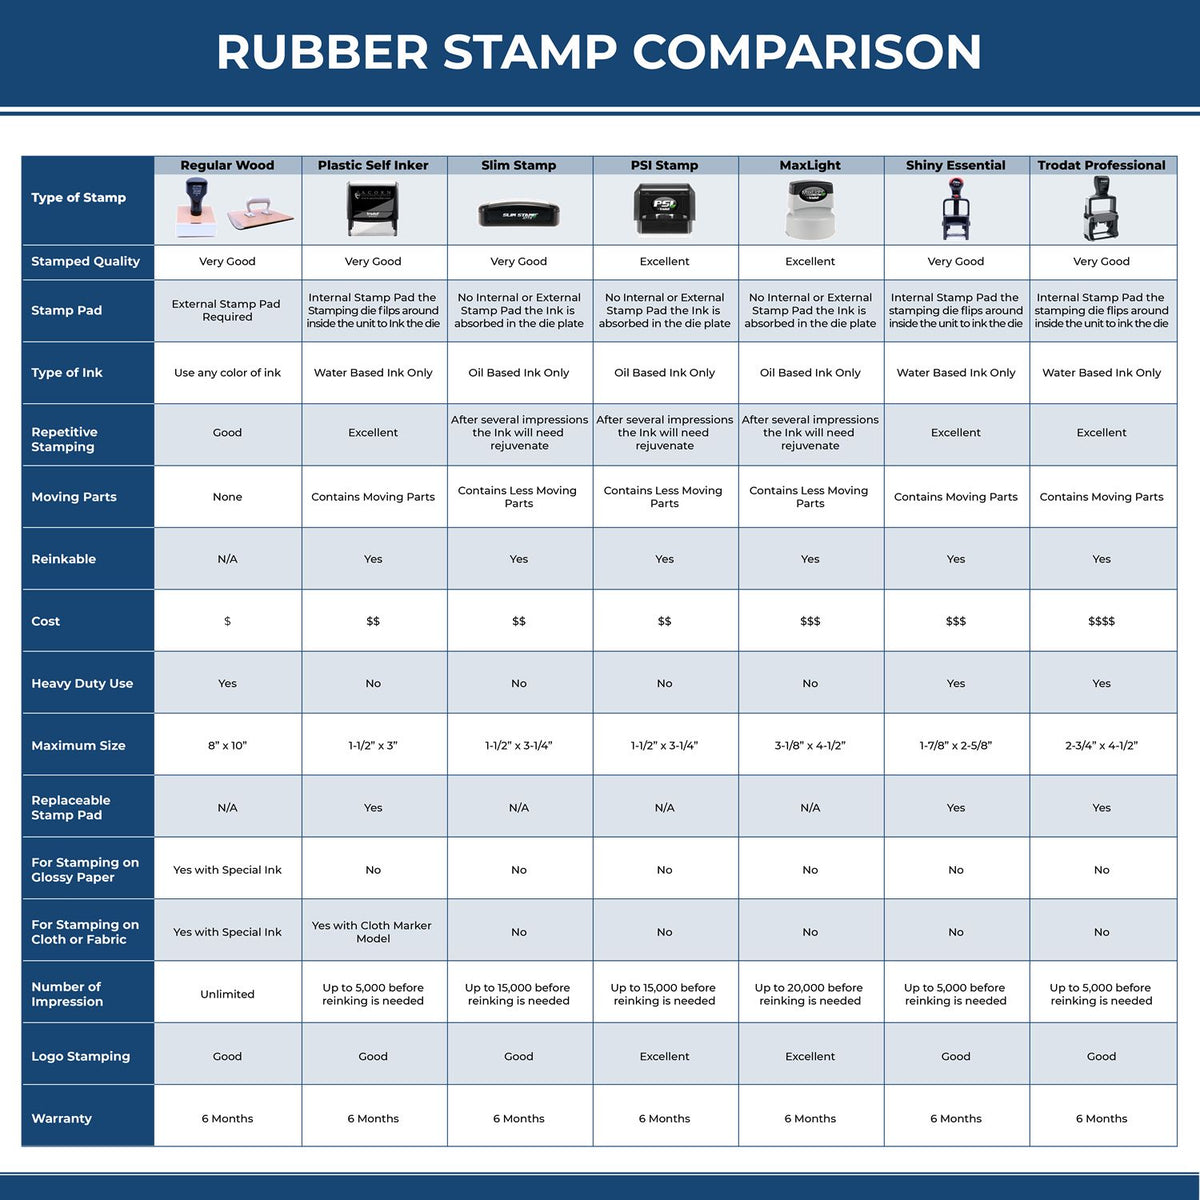 A comparison chart for the different types of mount models available for the Self-Inking Rectangular Indiana Notary Stamp.